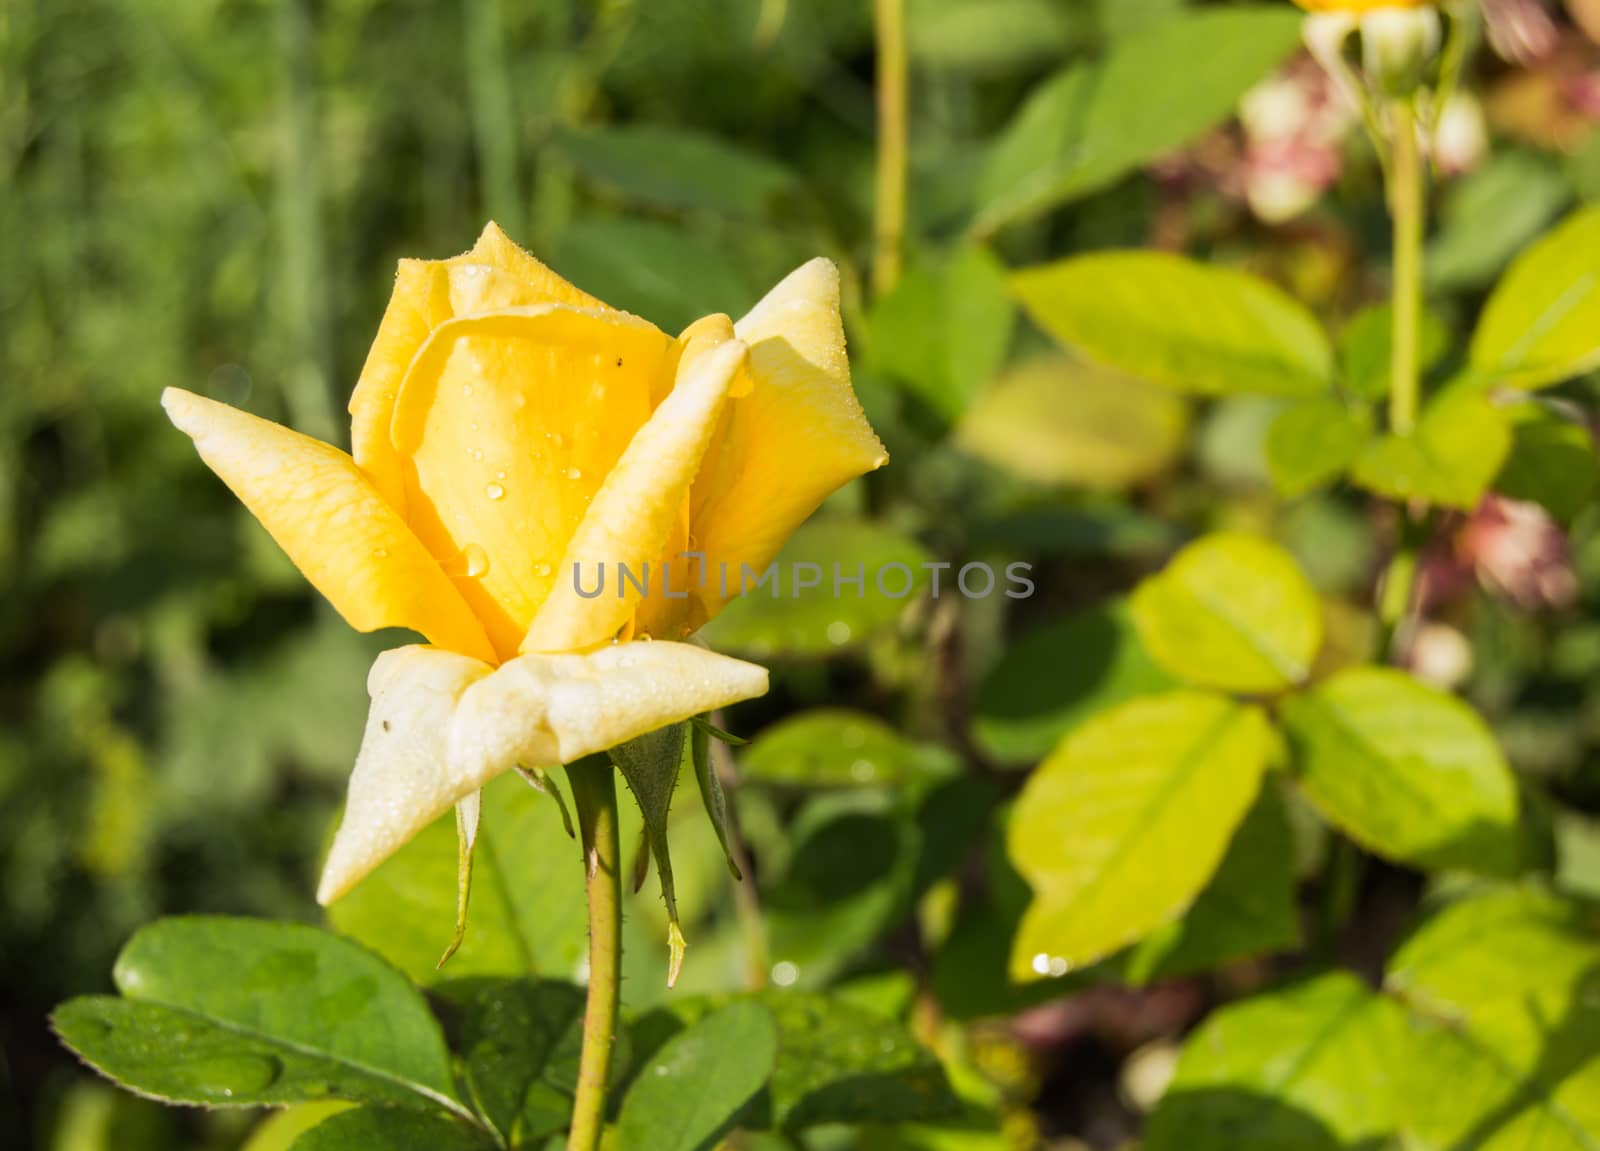 Beautiful yellow rose growing in the garden on a Sunny summer day.